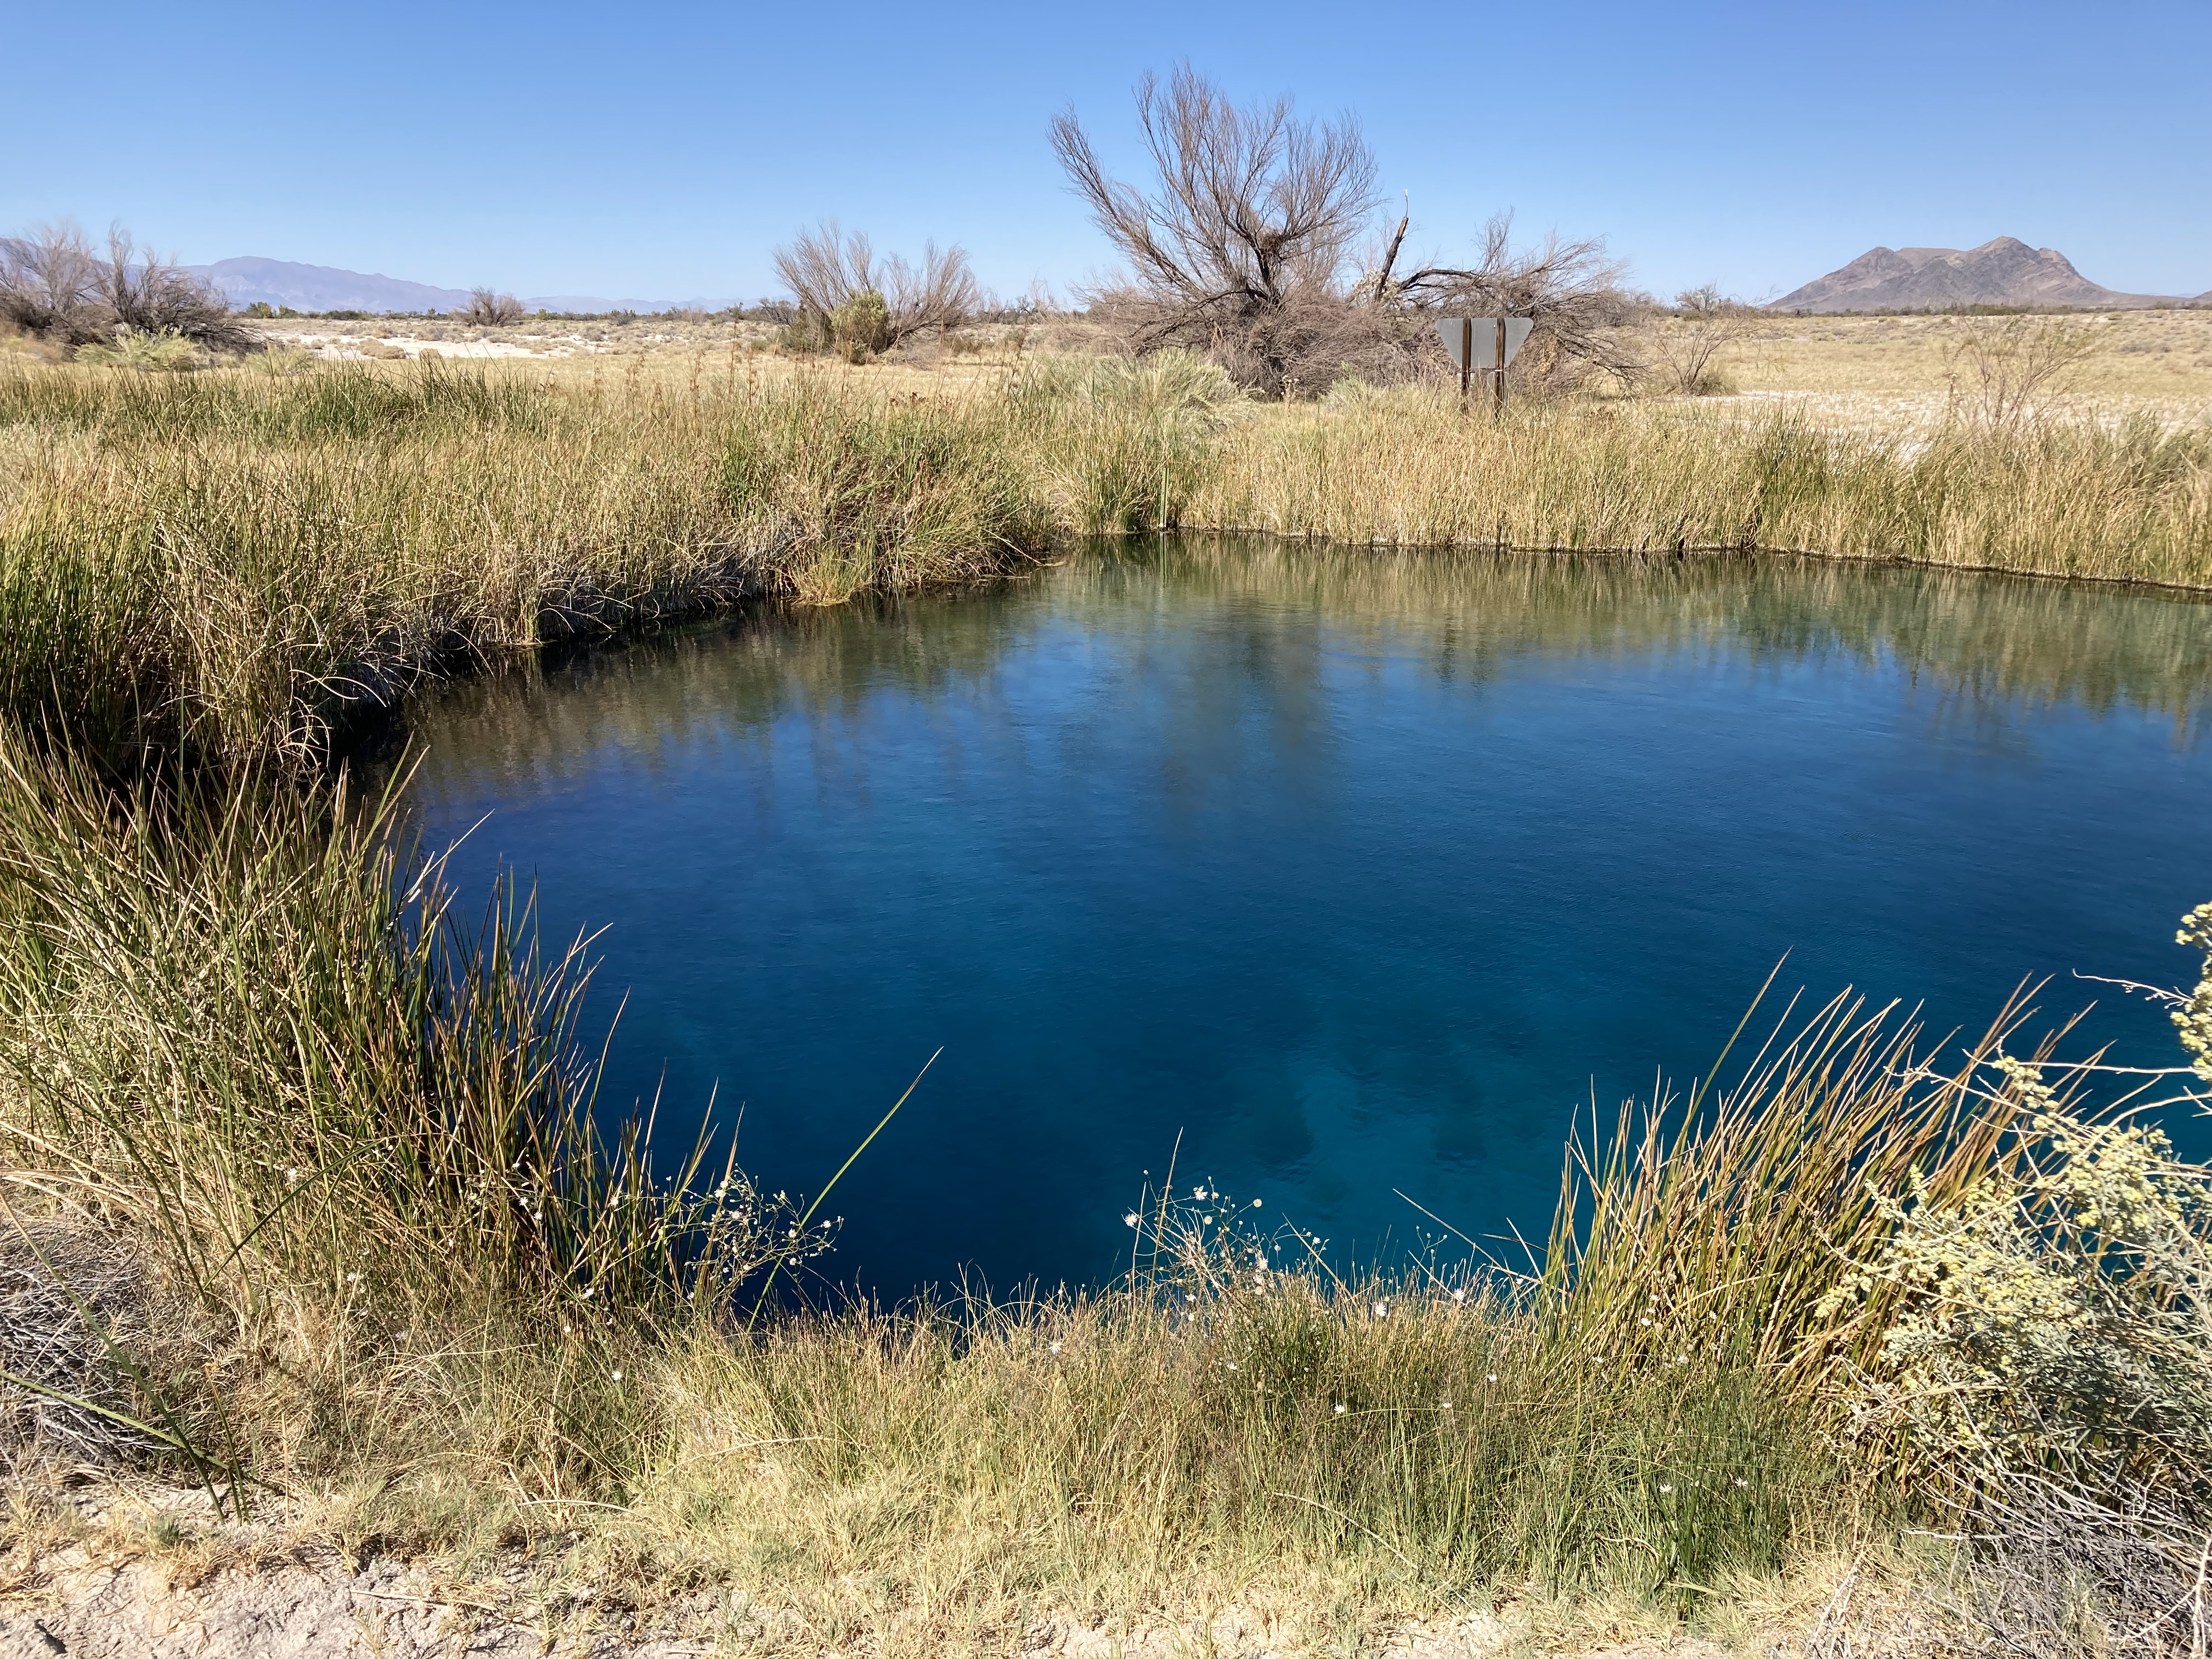 A small Spring in a desert habitat, mountains in the background